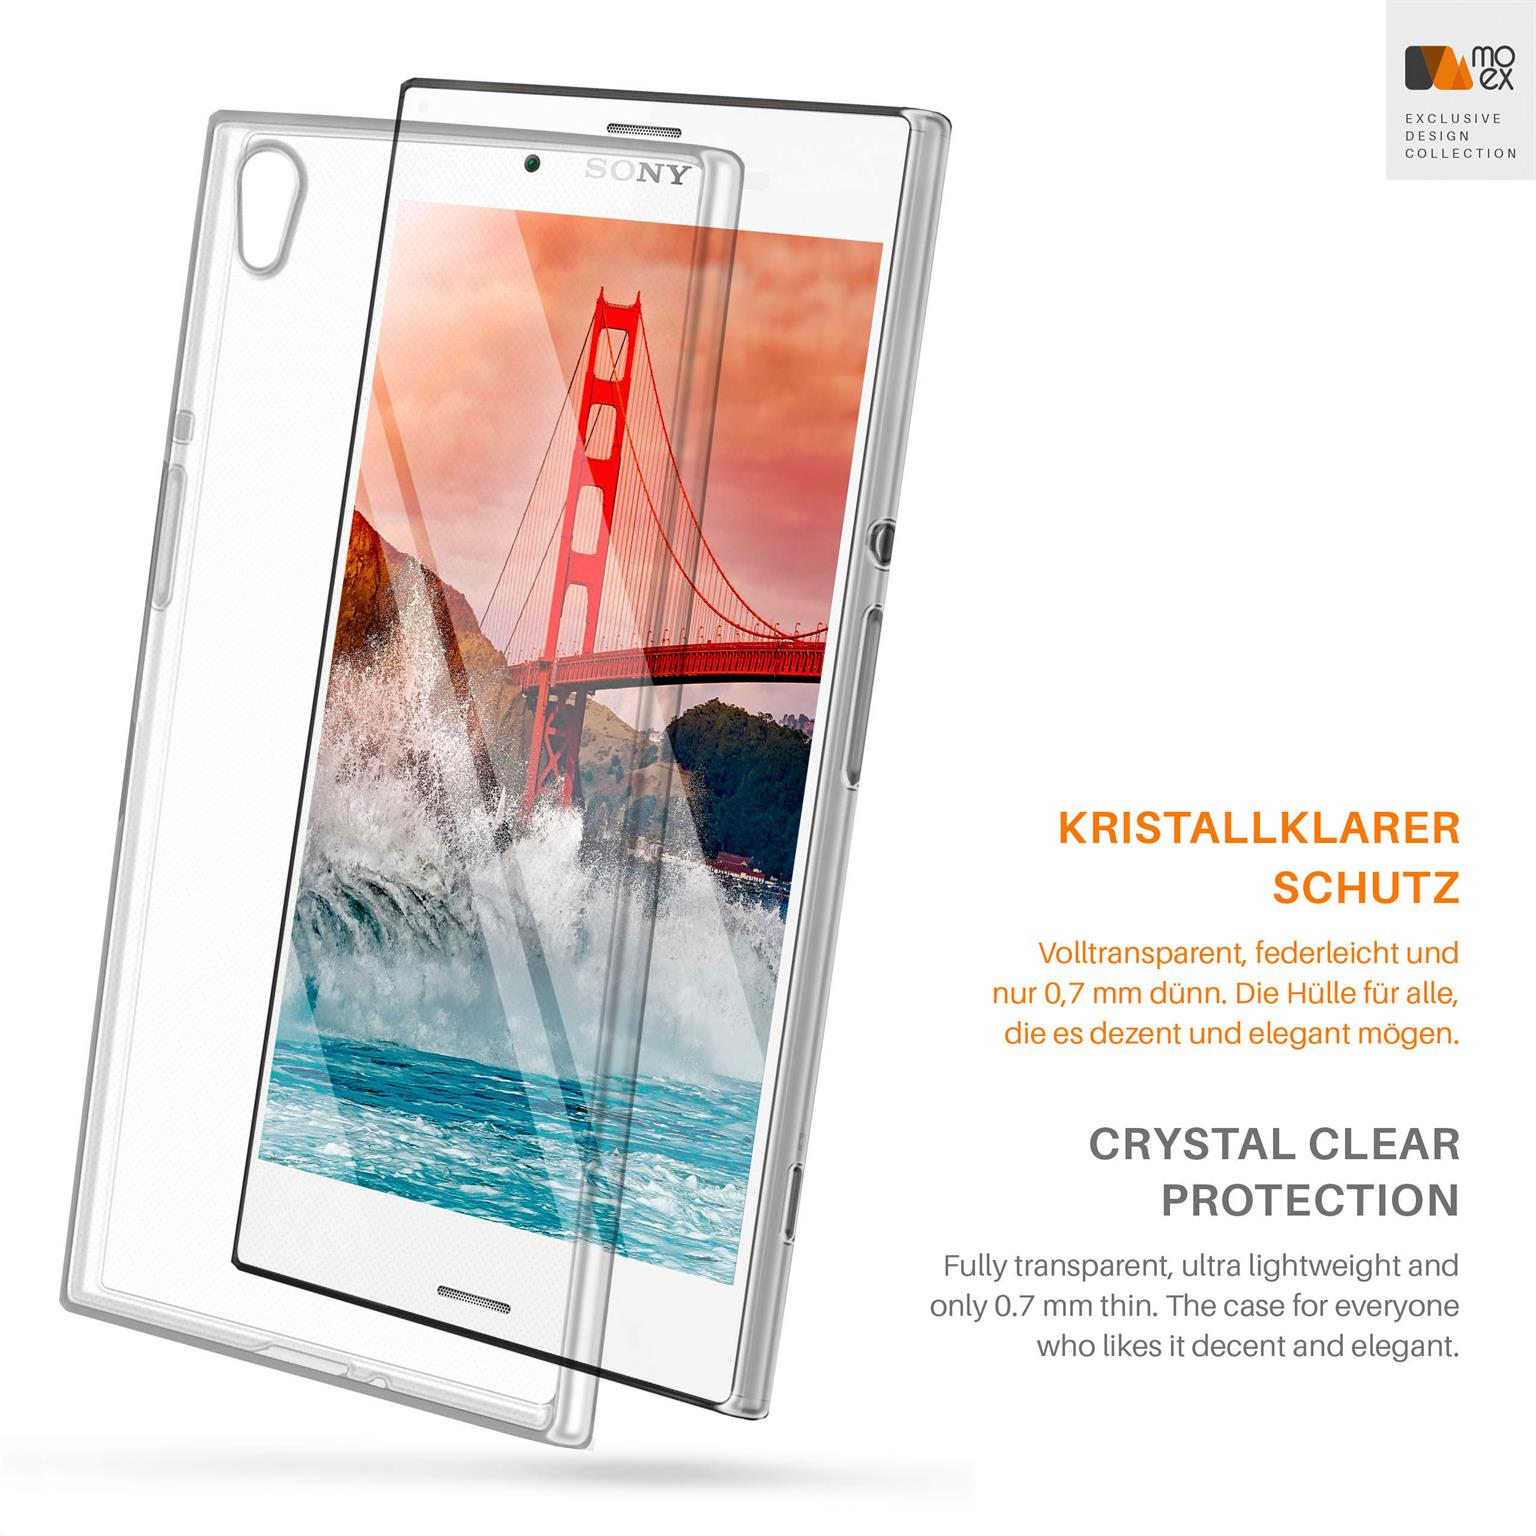 MOEX Aero Case, Backcover, Sony, Xperia Crystal-Clear Plus, Z3